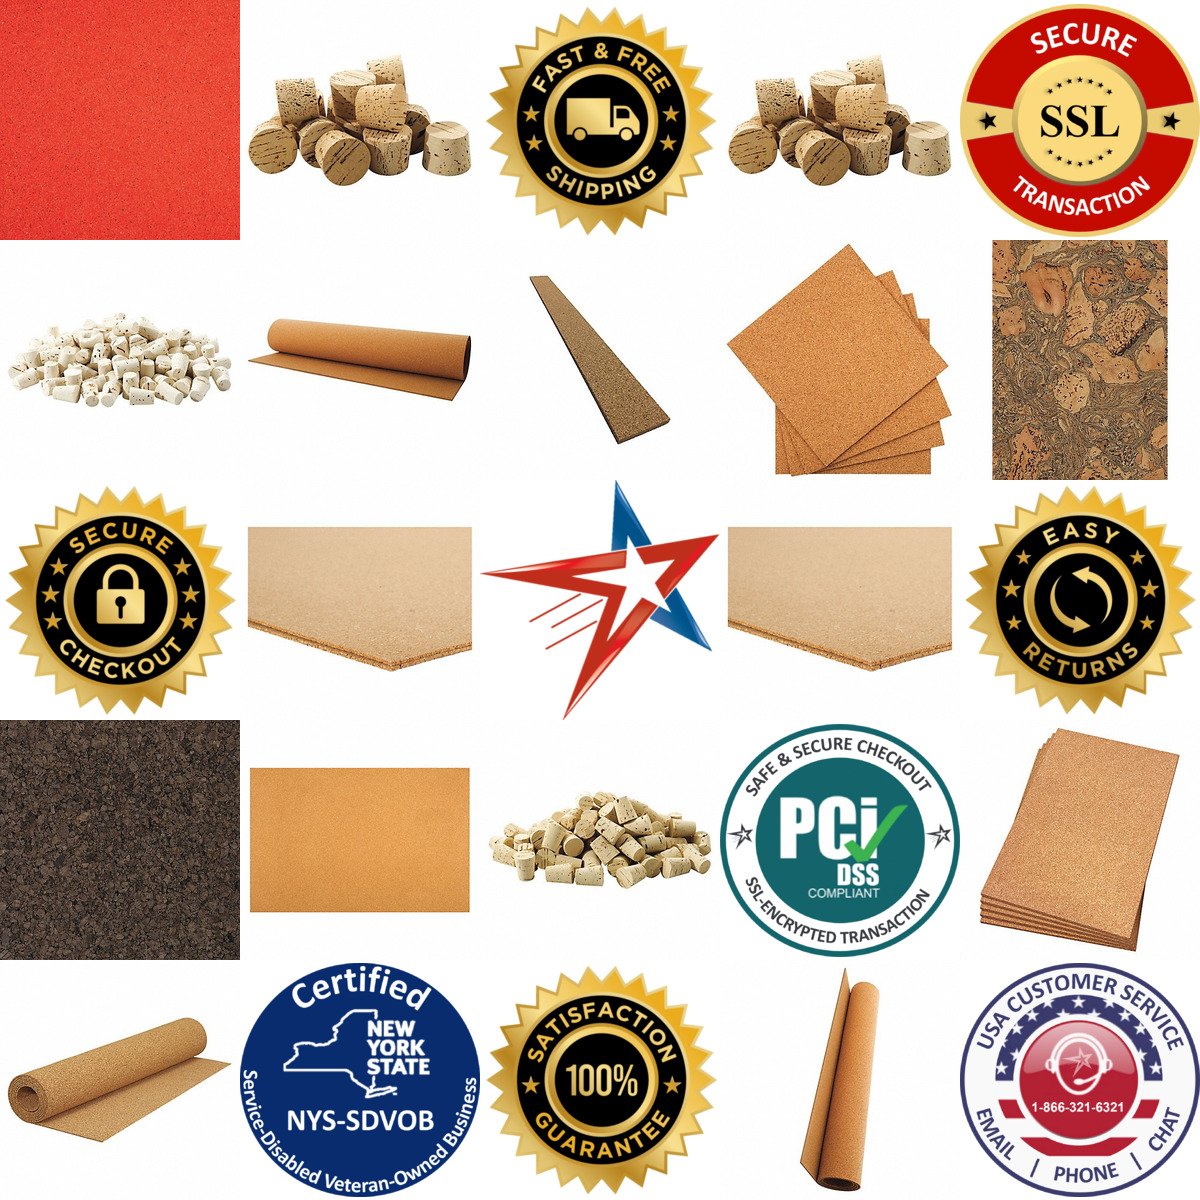 A selection of Cork products on GoVets